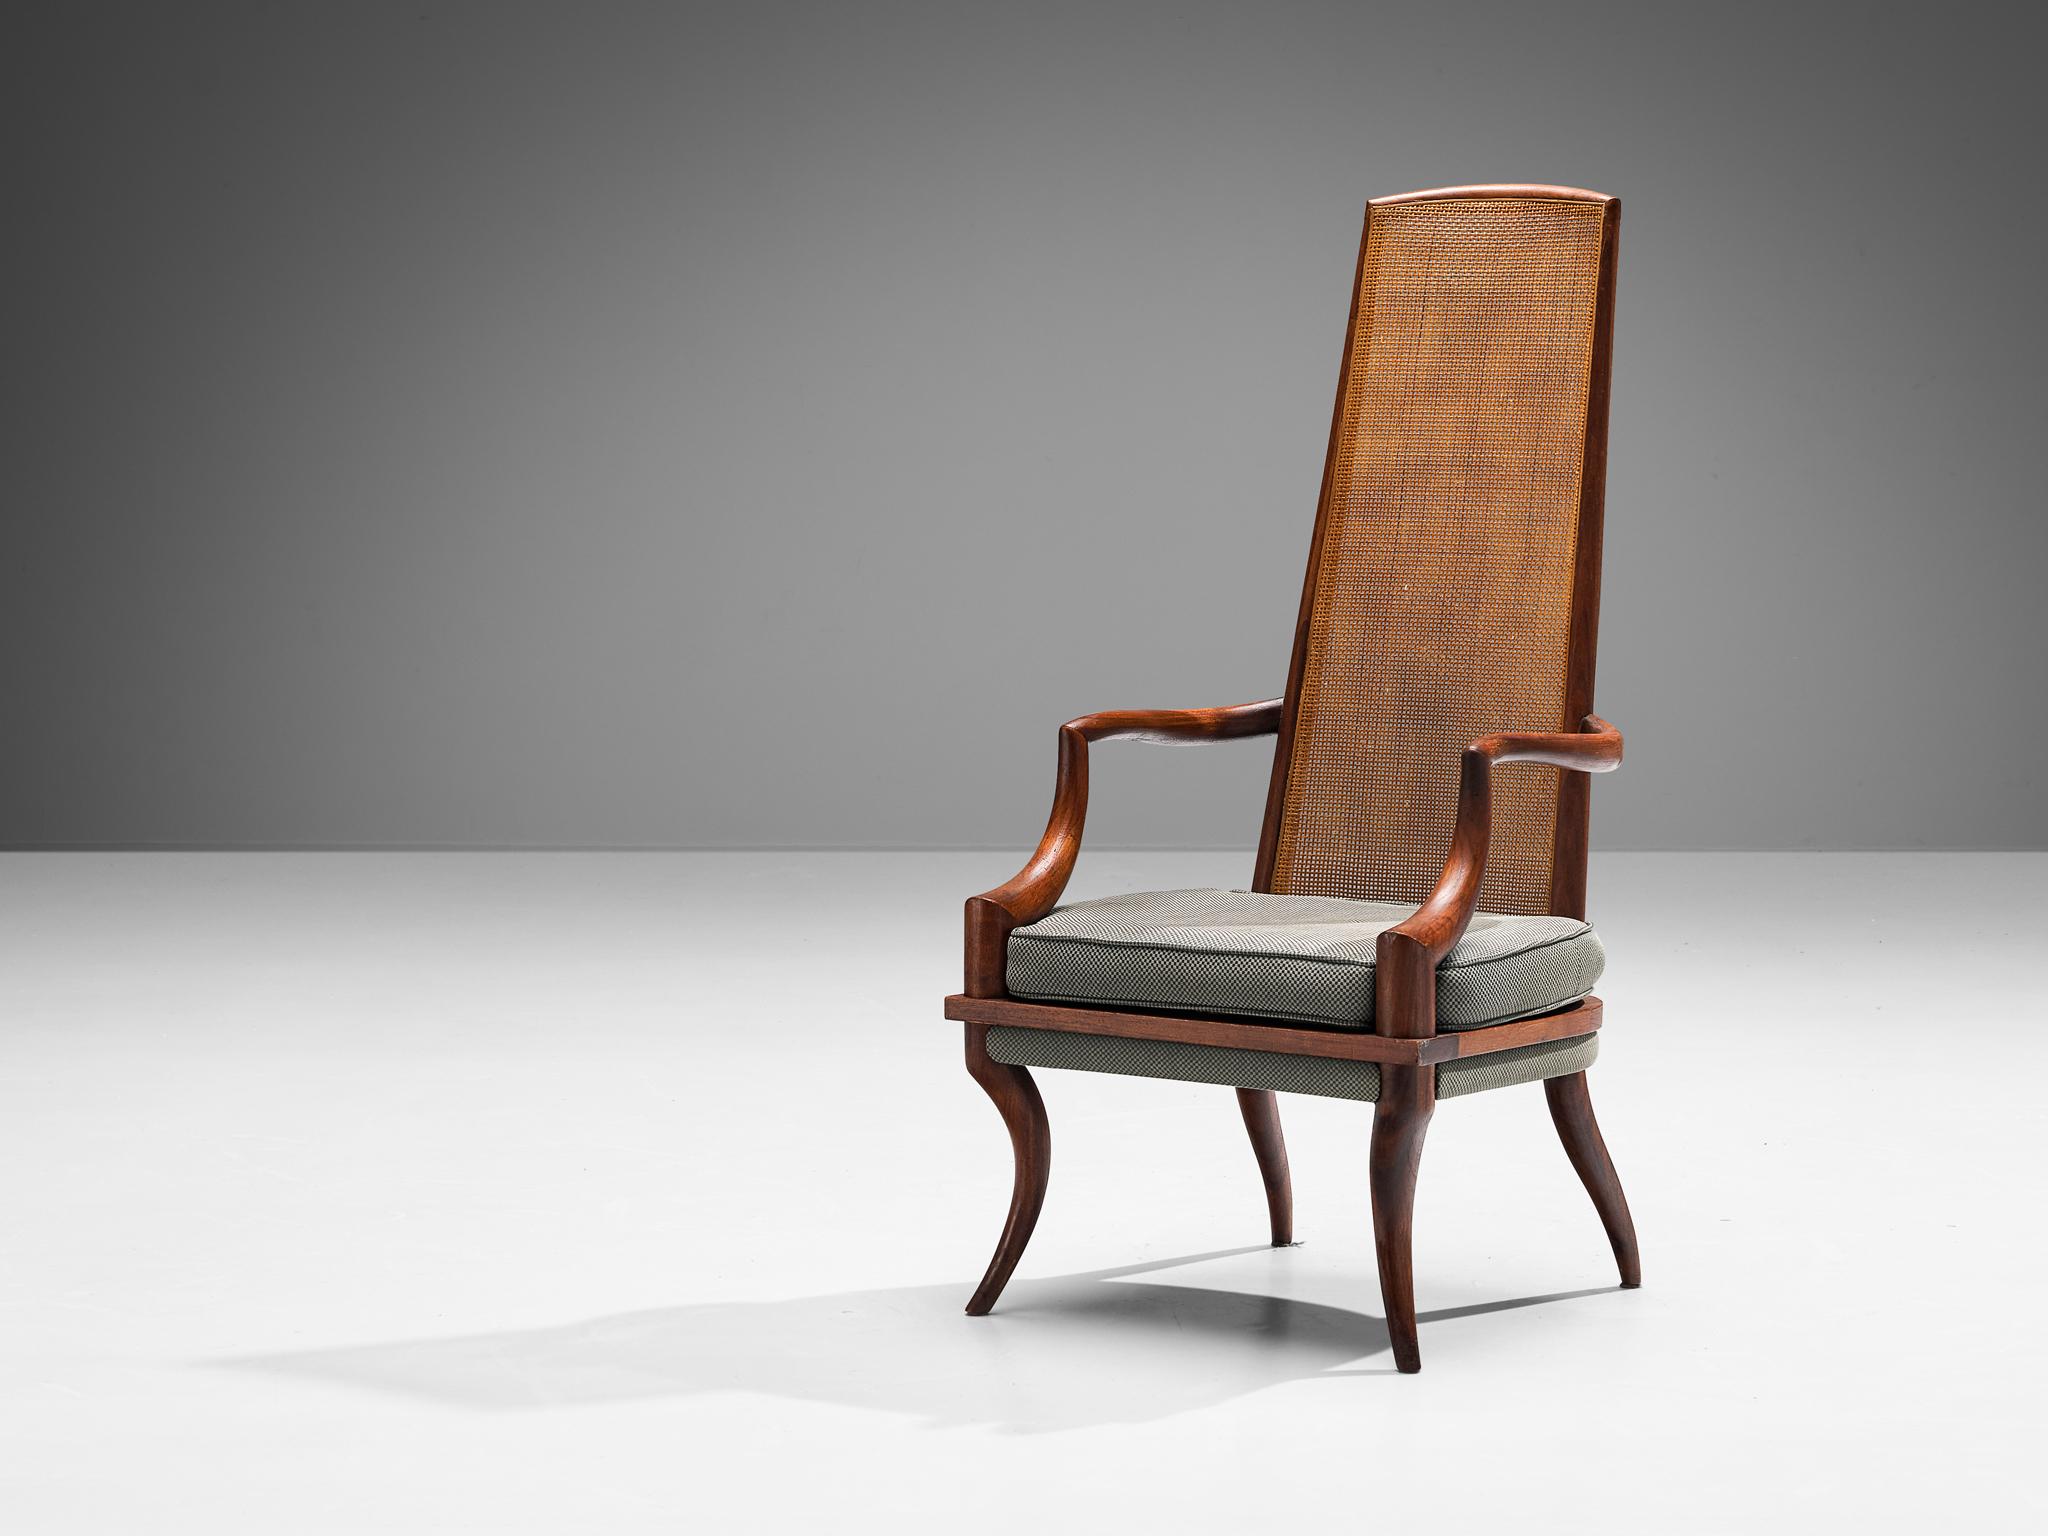 Douglas Brown for Grand Ledge Chair Company, highback chair, teak, cane, reupholstered fabric, United States, 1950s.

Very elegant high back chair designed by Douglas Brown for Grand Ledge Chair Company in the 1950s. This throne chair features a